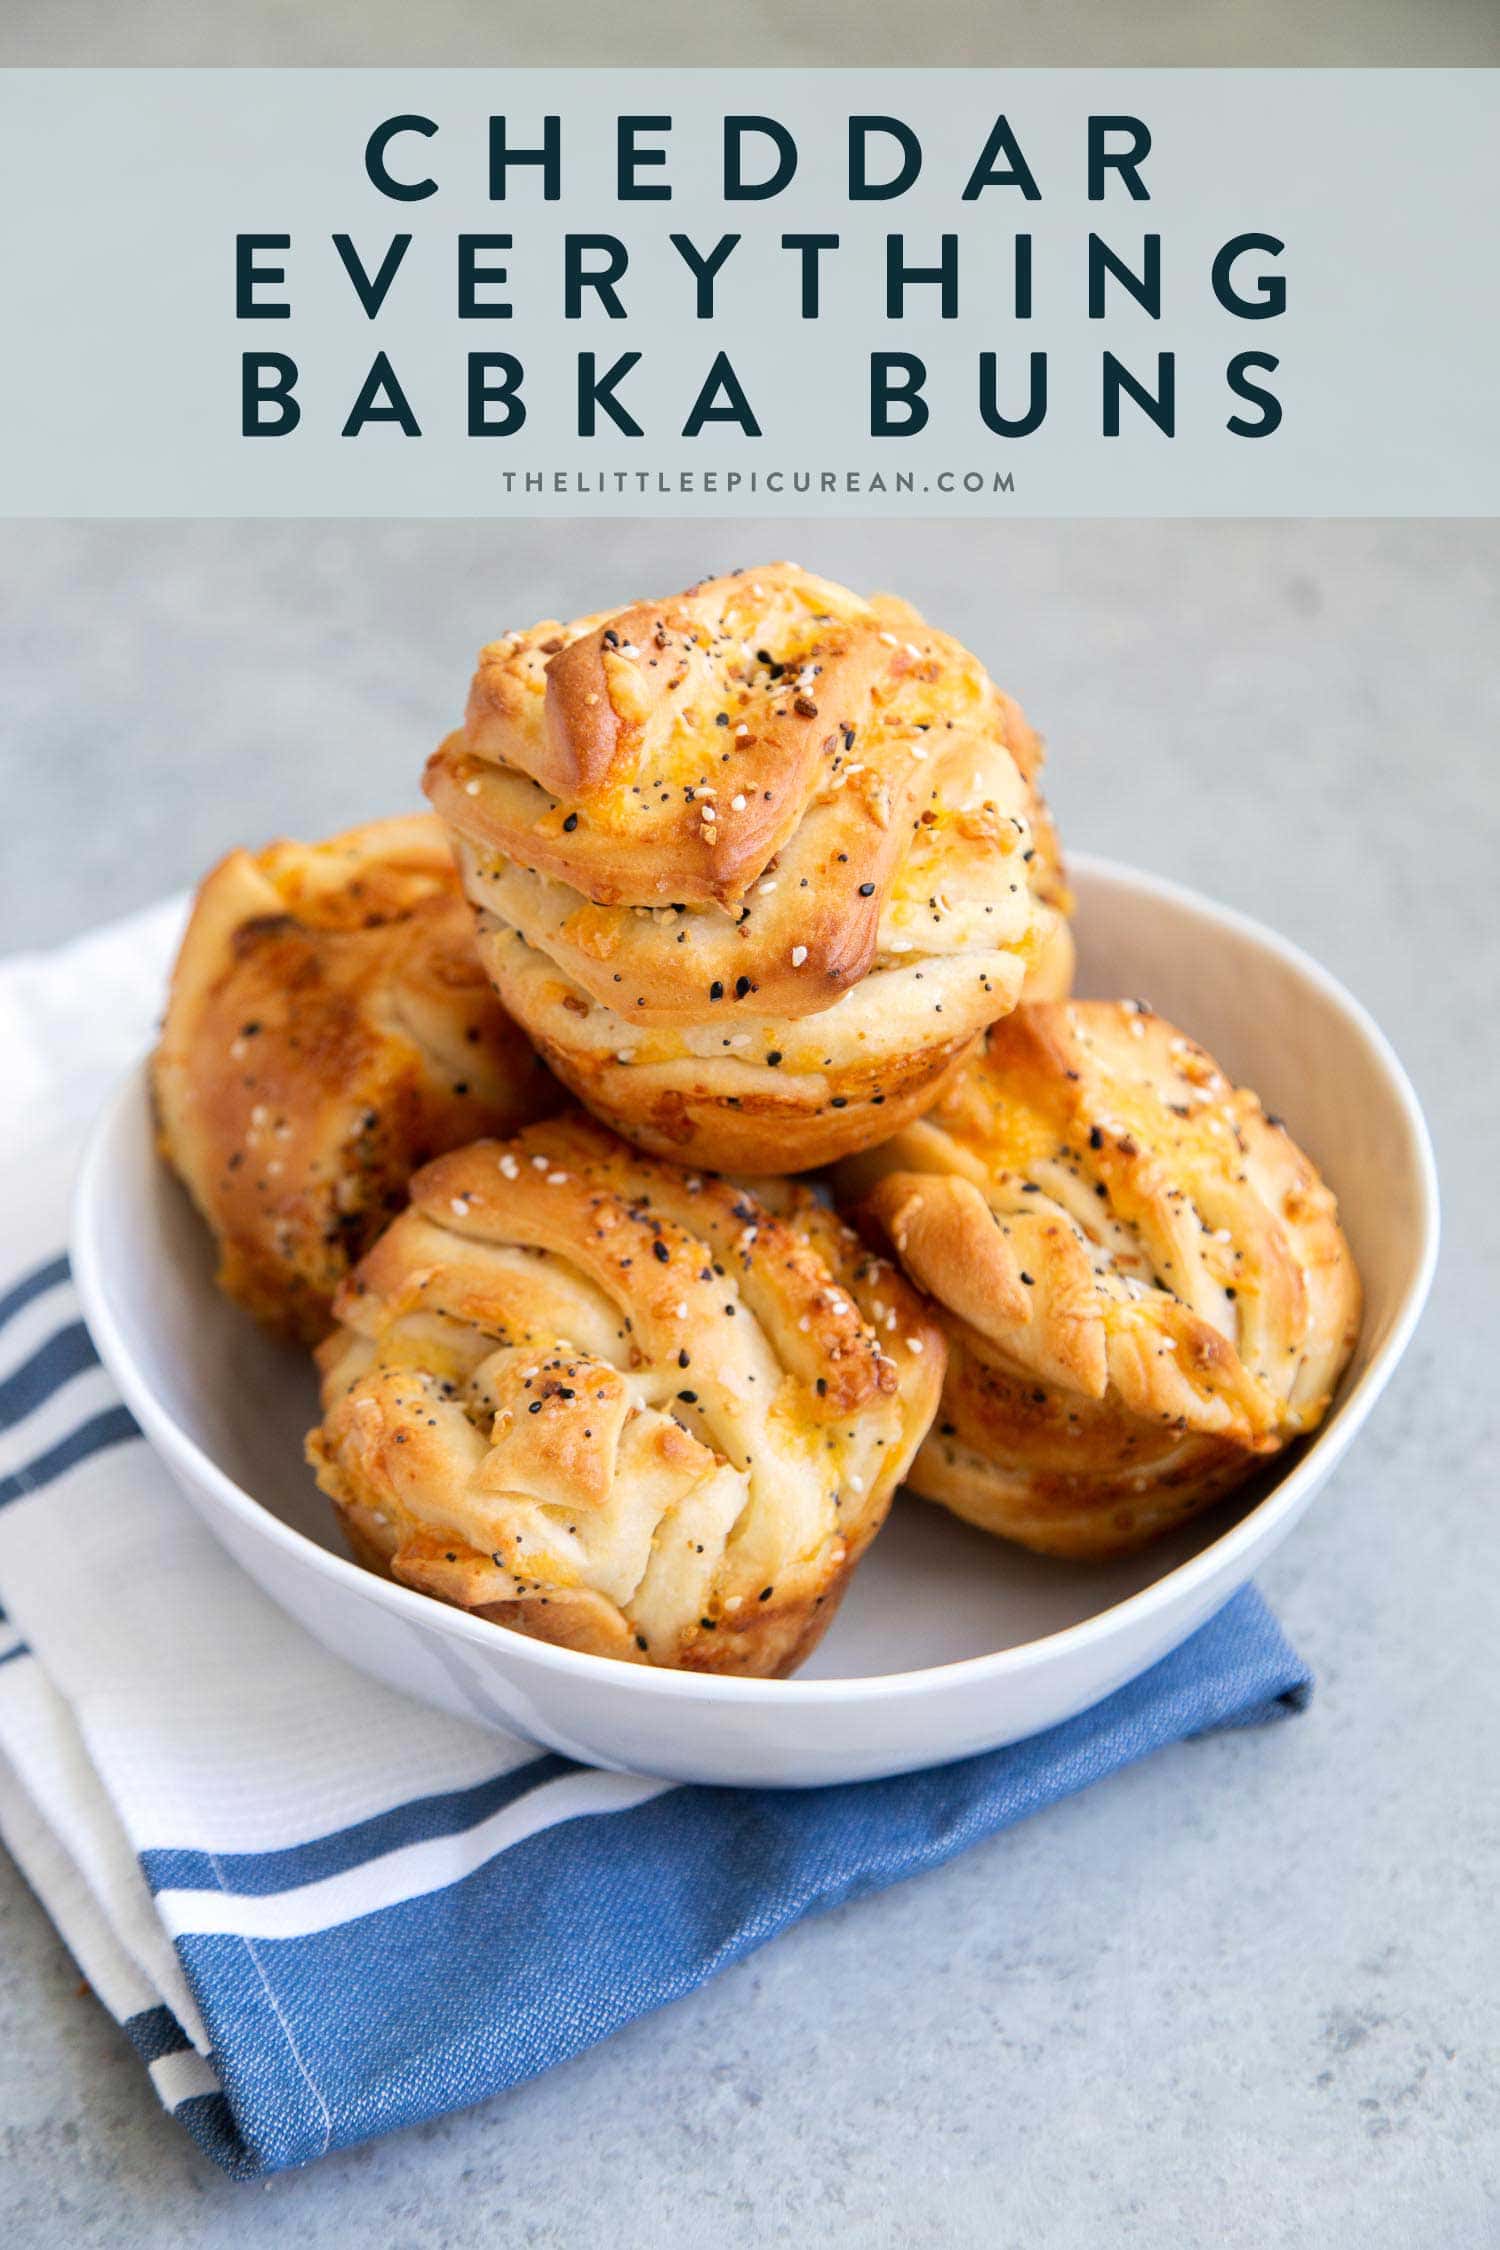 Cheddar Everything Babka Buns. Soft yeasted layered bread dough filled with shredded cheddar cheese and everything bagel seasoning mix.